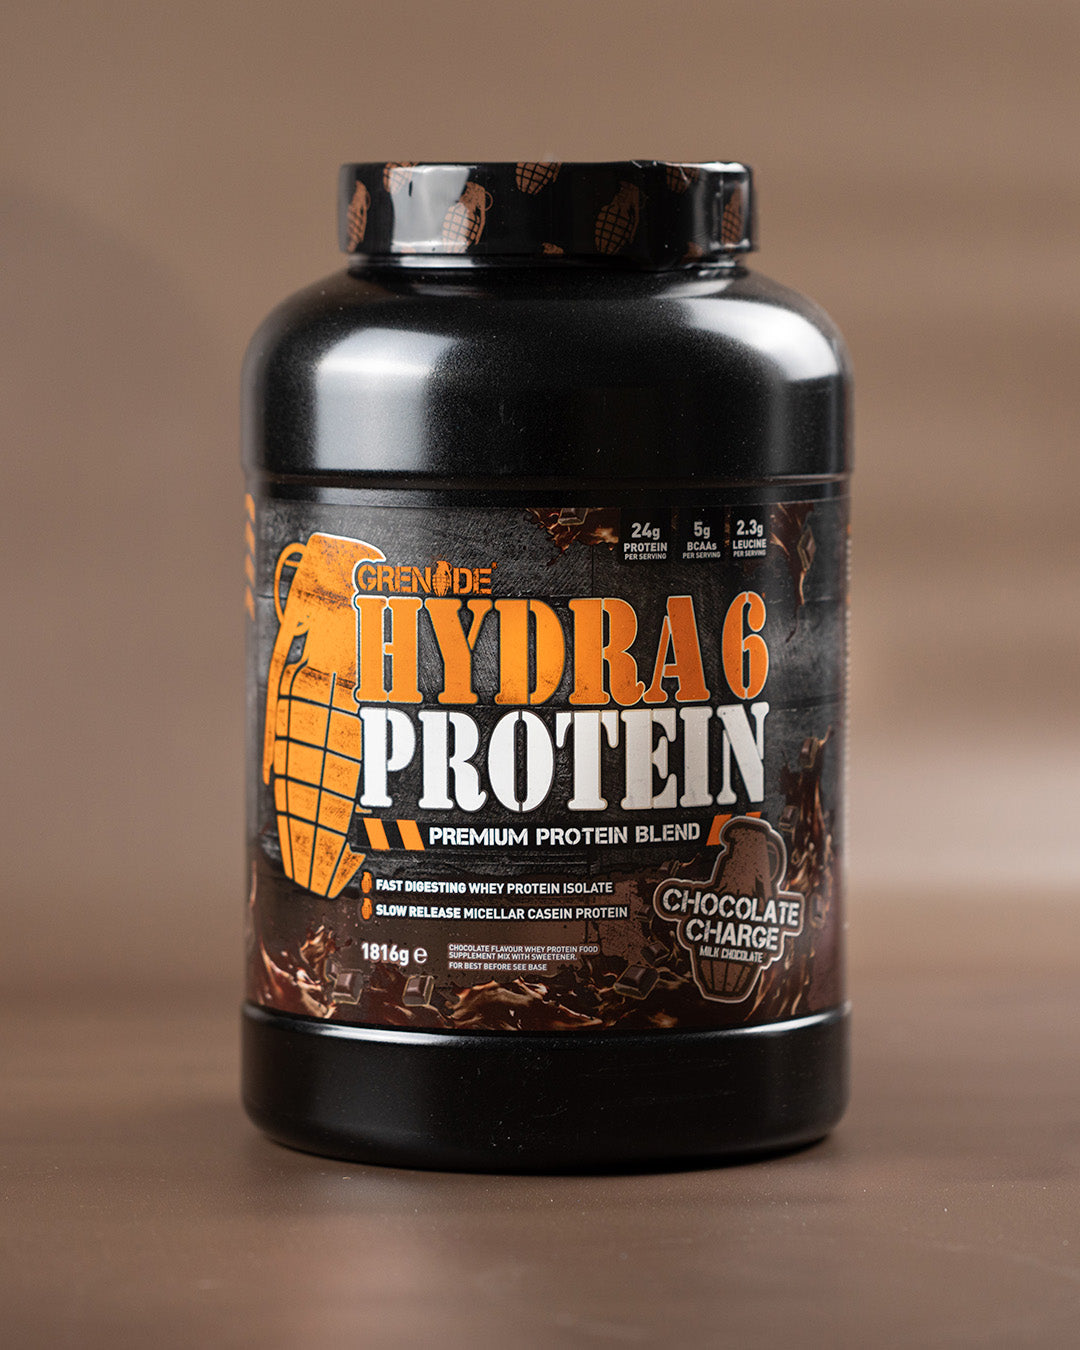 Grenade Hydra 6 Protein Powder - Chocolate Charge 52 Servings